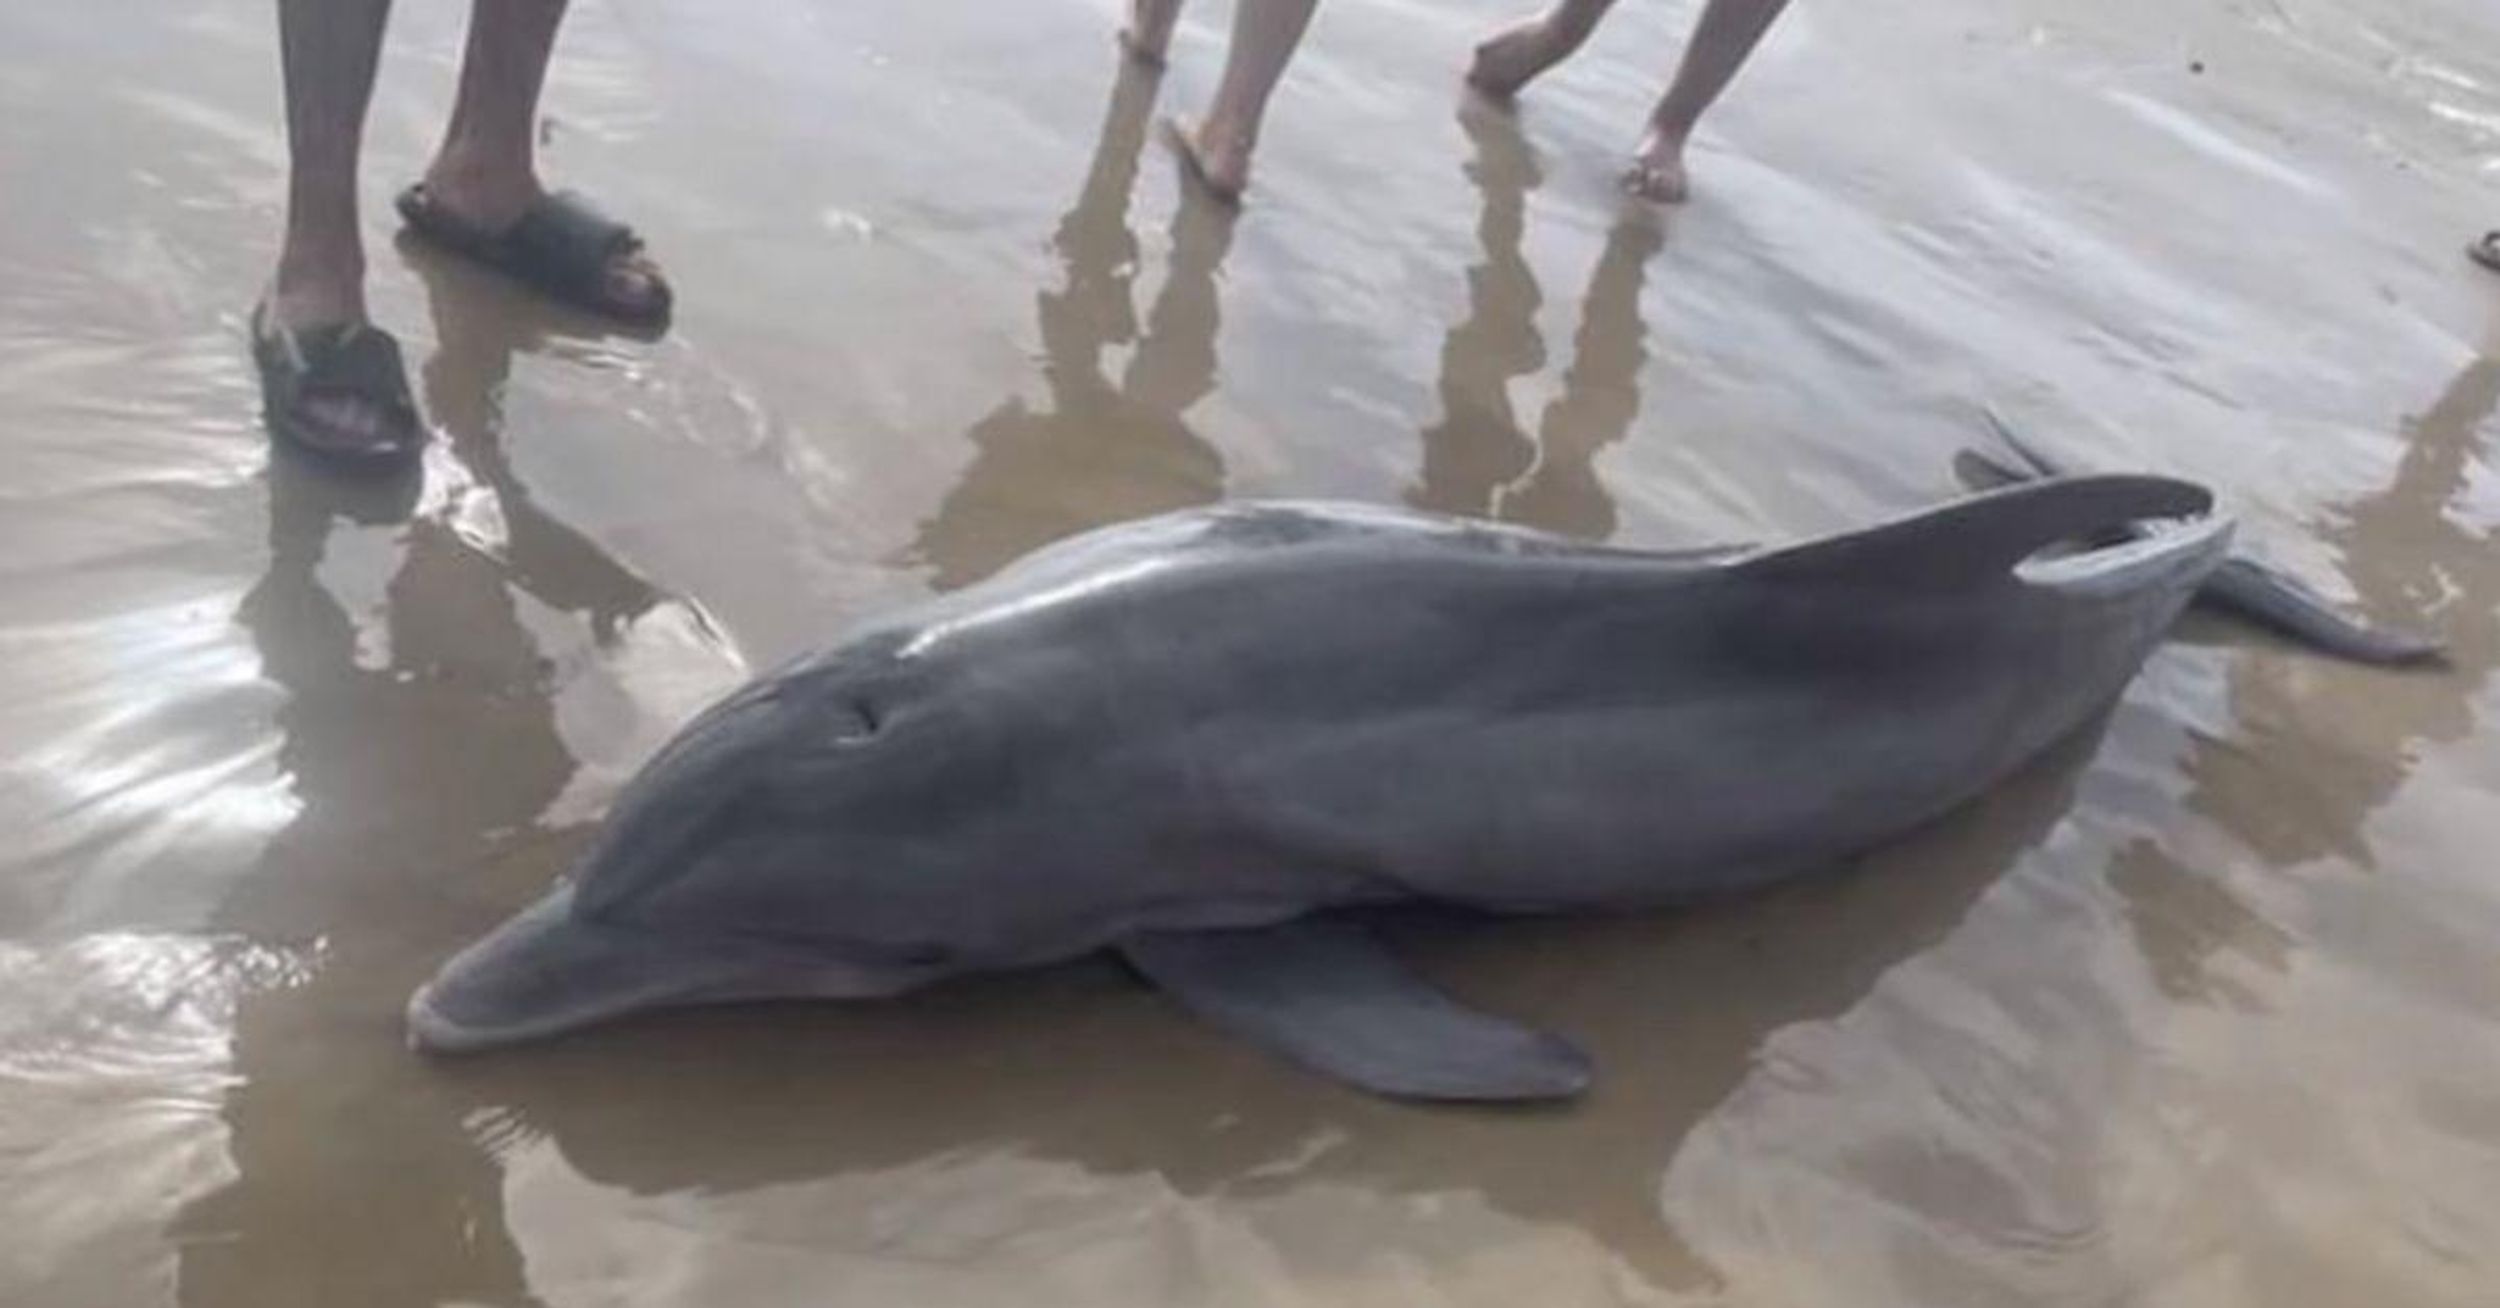 Beachgoers Kill Dolphin Stranded On Texas Beach By Trying To 'Ride' It After Dragging It Back Into Water